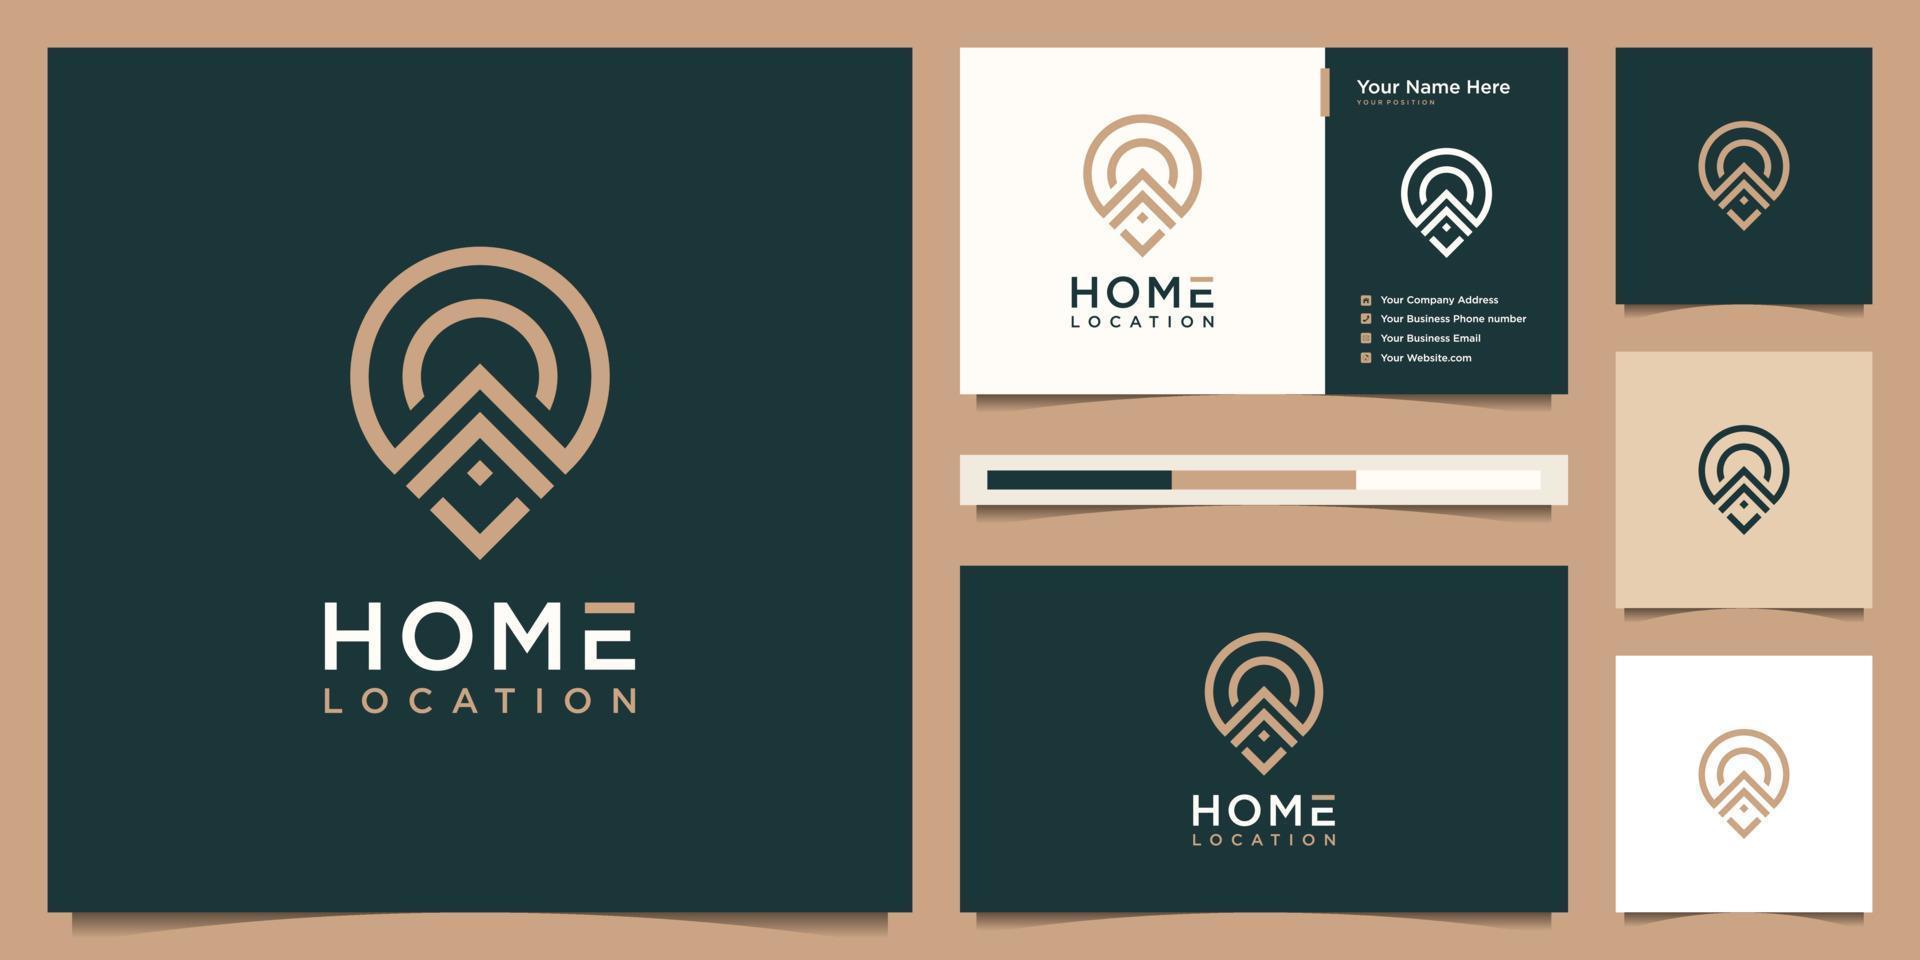 home location logo design and business card template. luxury logo home and pin location icon symbol real estate. vector